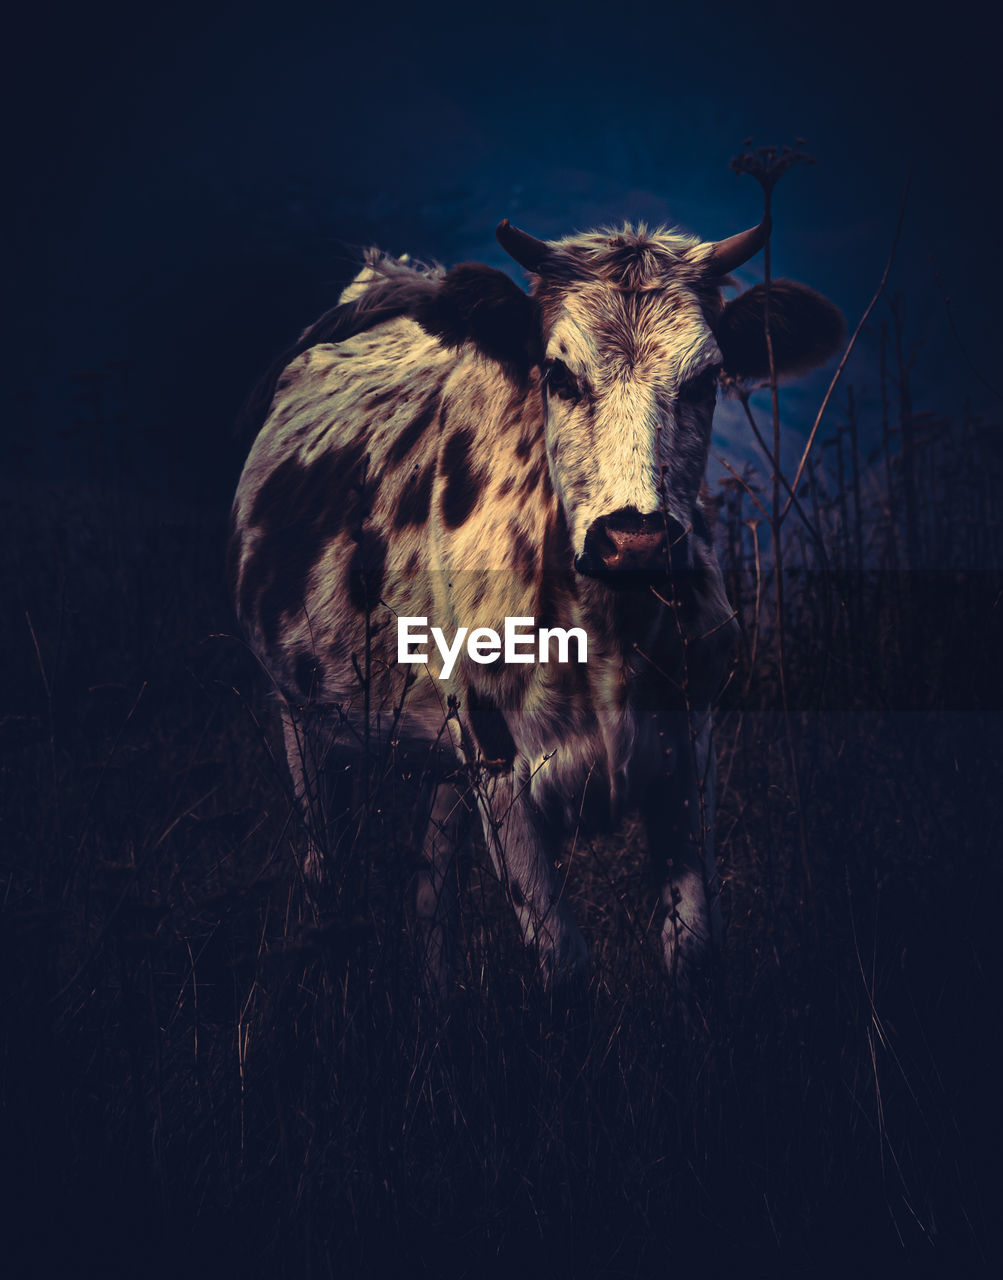 animal, animal themes, mammal, one animal, cattle, animal wildlife, domestic animals, livestock, no people, looking at camera, nature, portrait, wildlife, horned, animal body part, plant, darkness, pet, outdoors, land, grass, standing, field